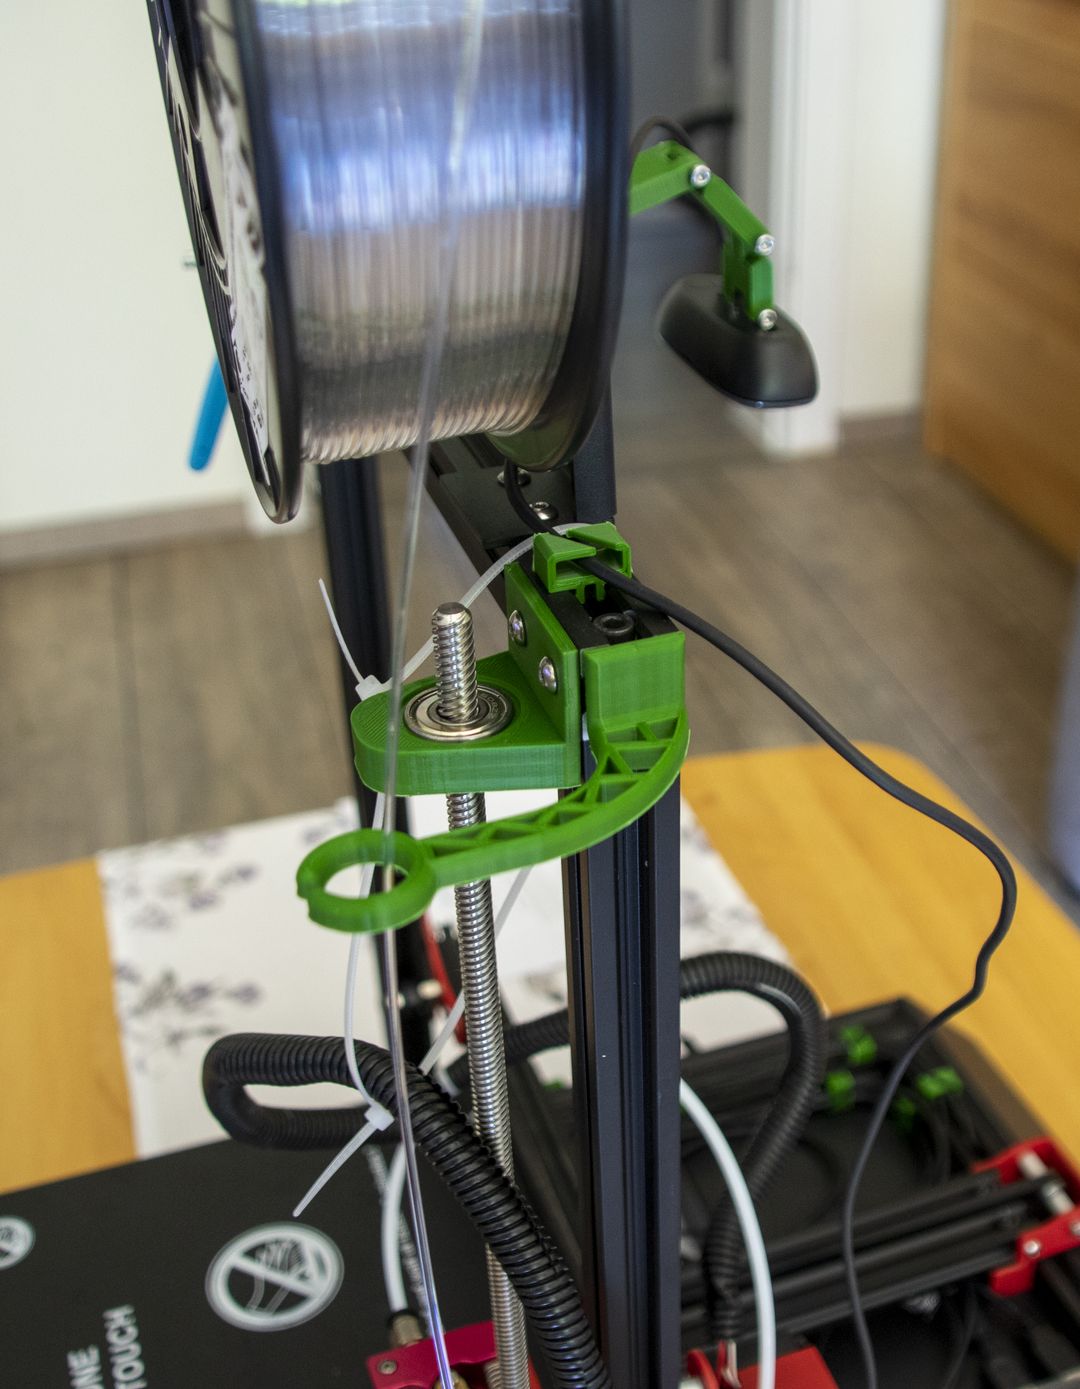 Z-Axis Stabilizer and Upper Filament Guide